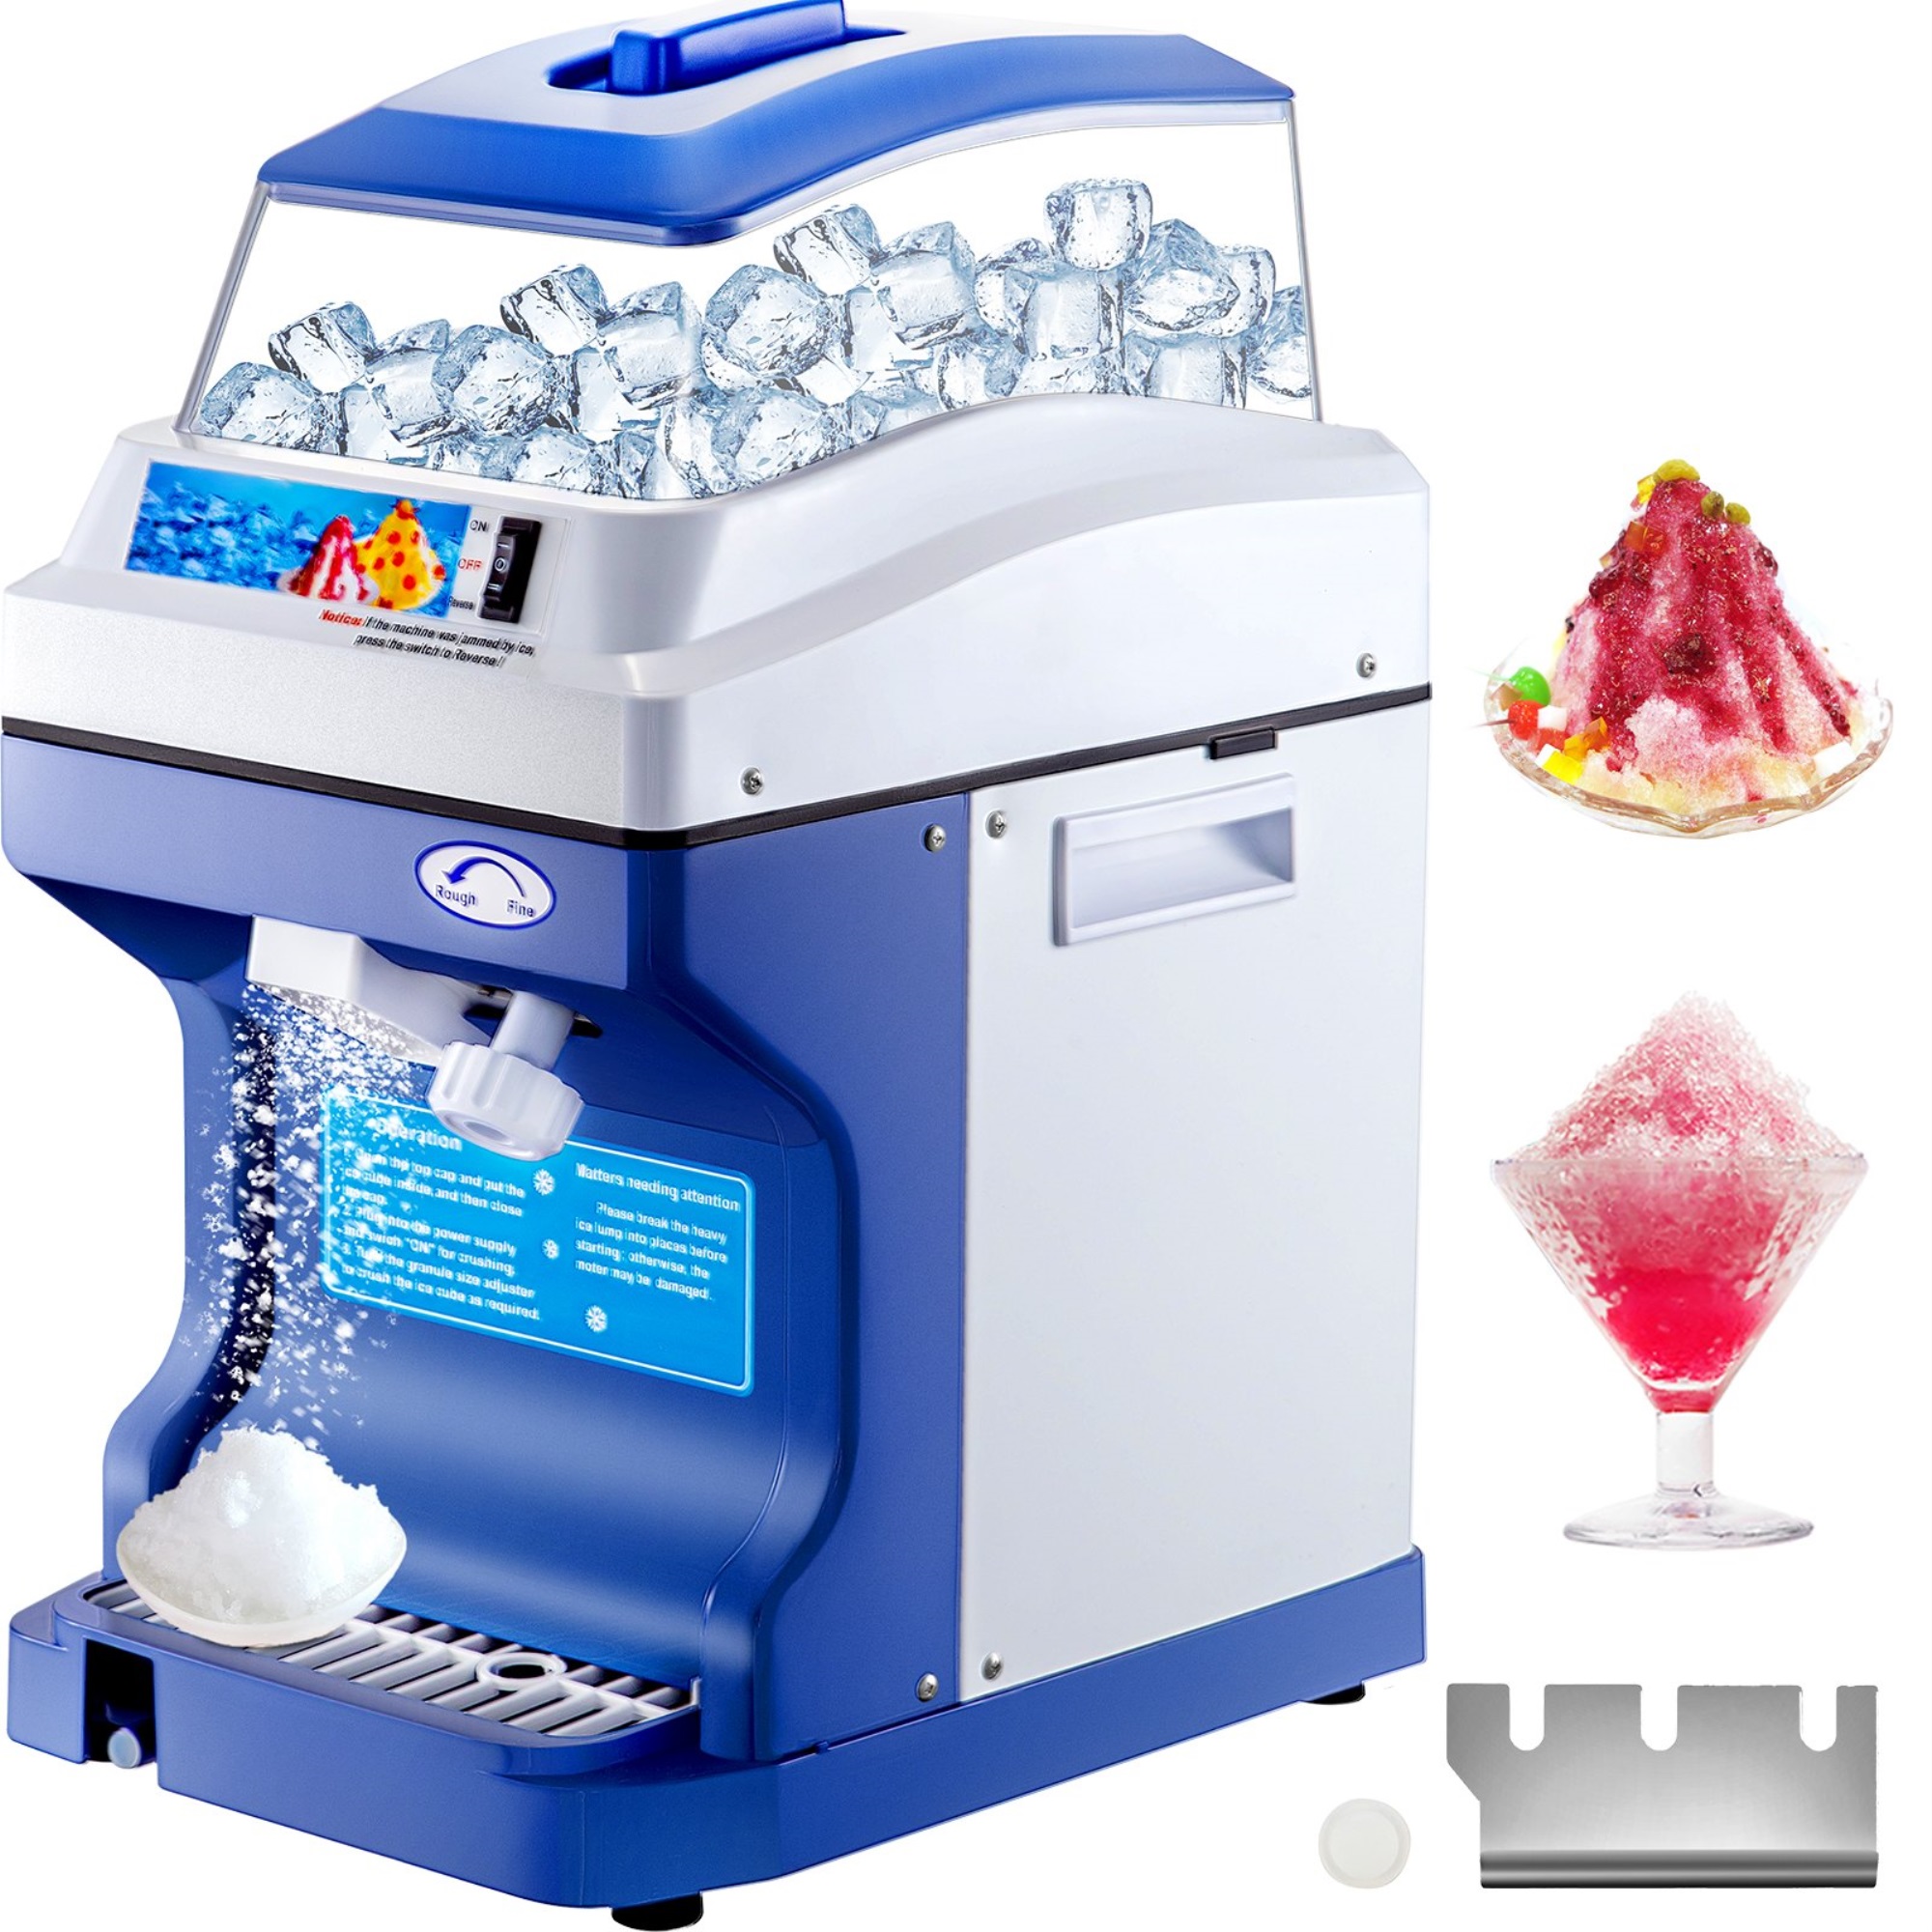 VEVOR Commercial Ice Shaver Ice Shaving Machine, with Hopper, Electric Snow Cone Maker